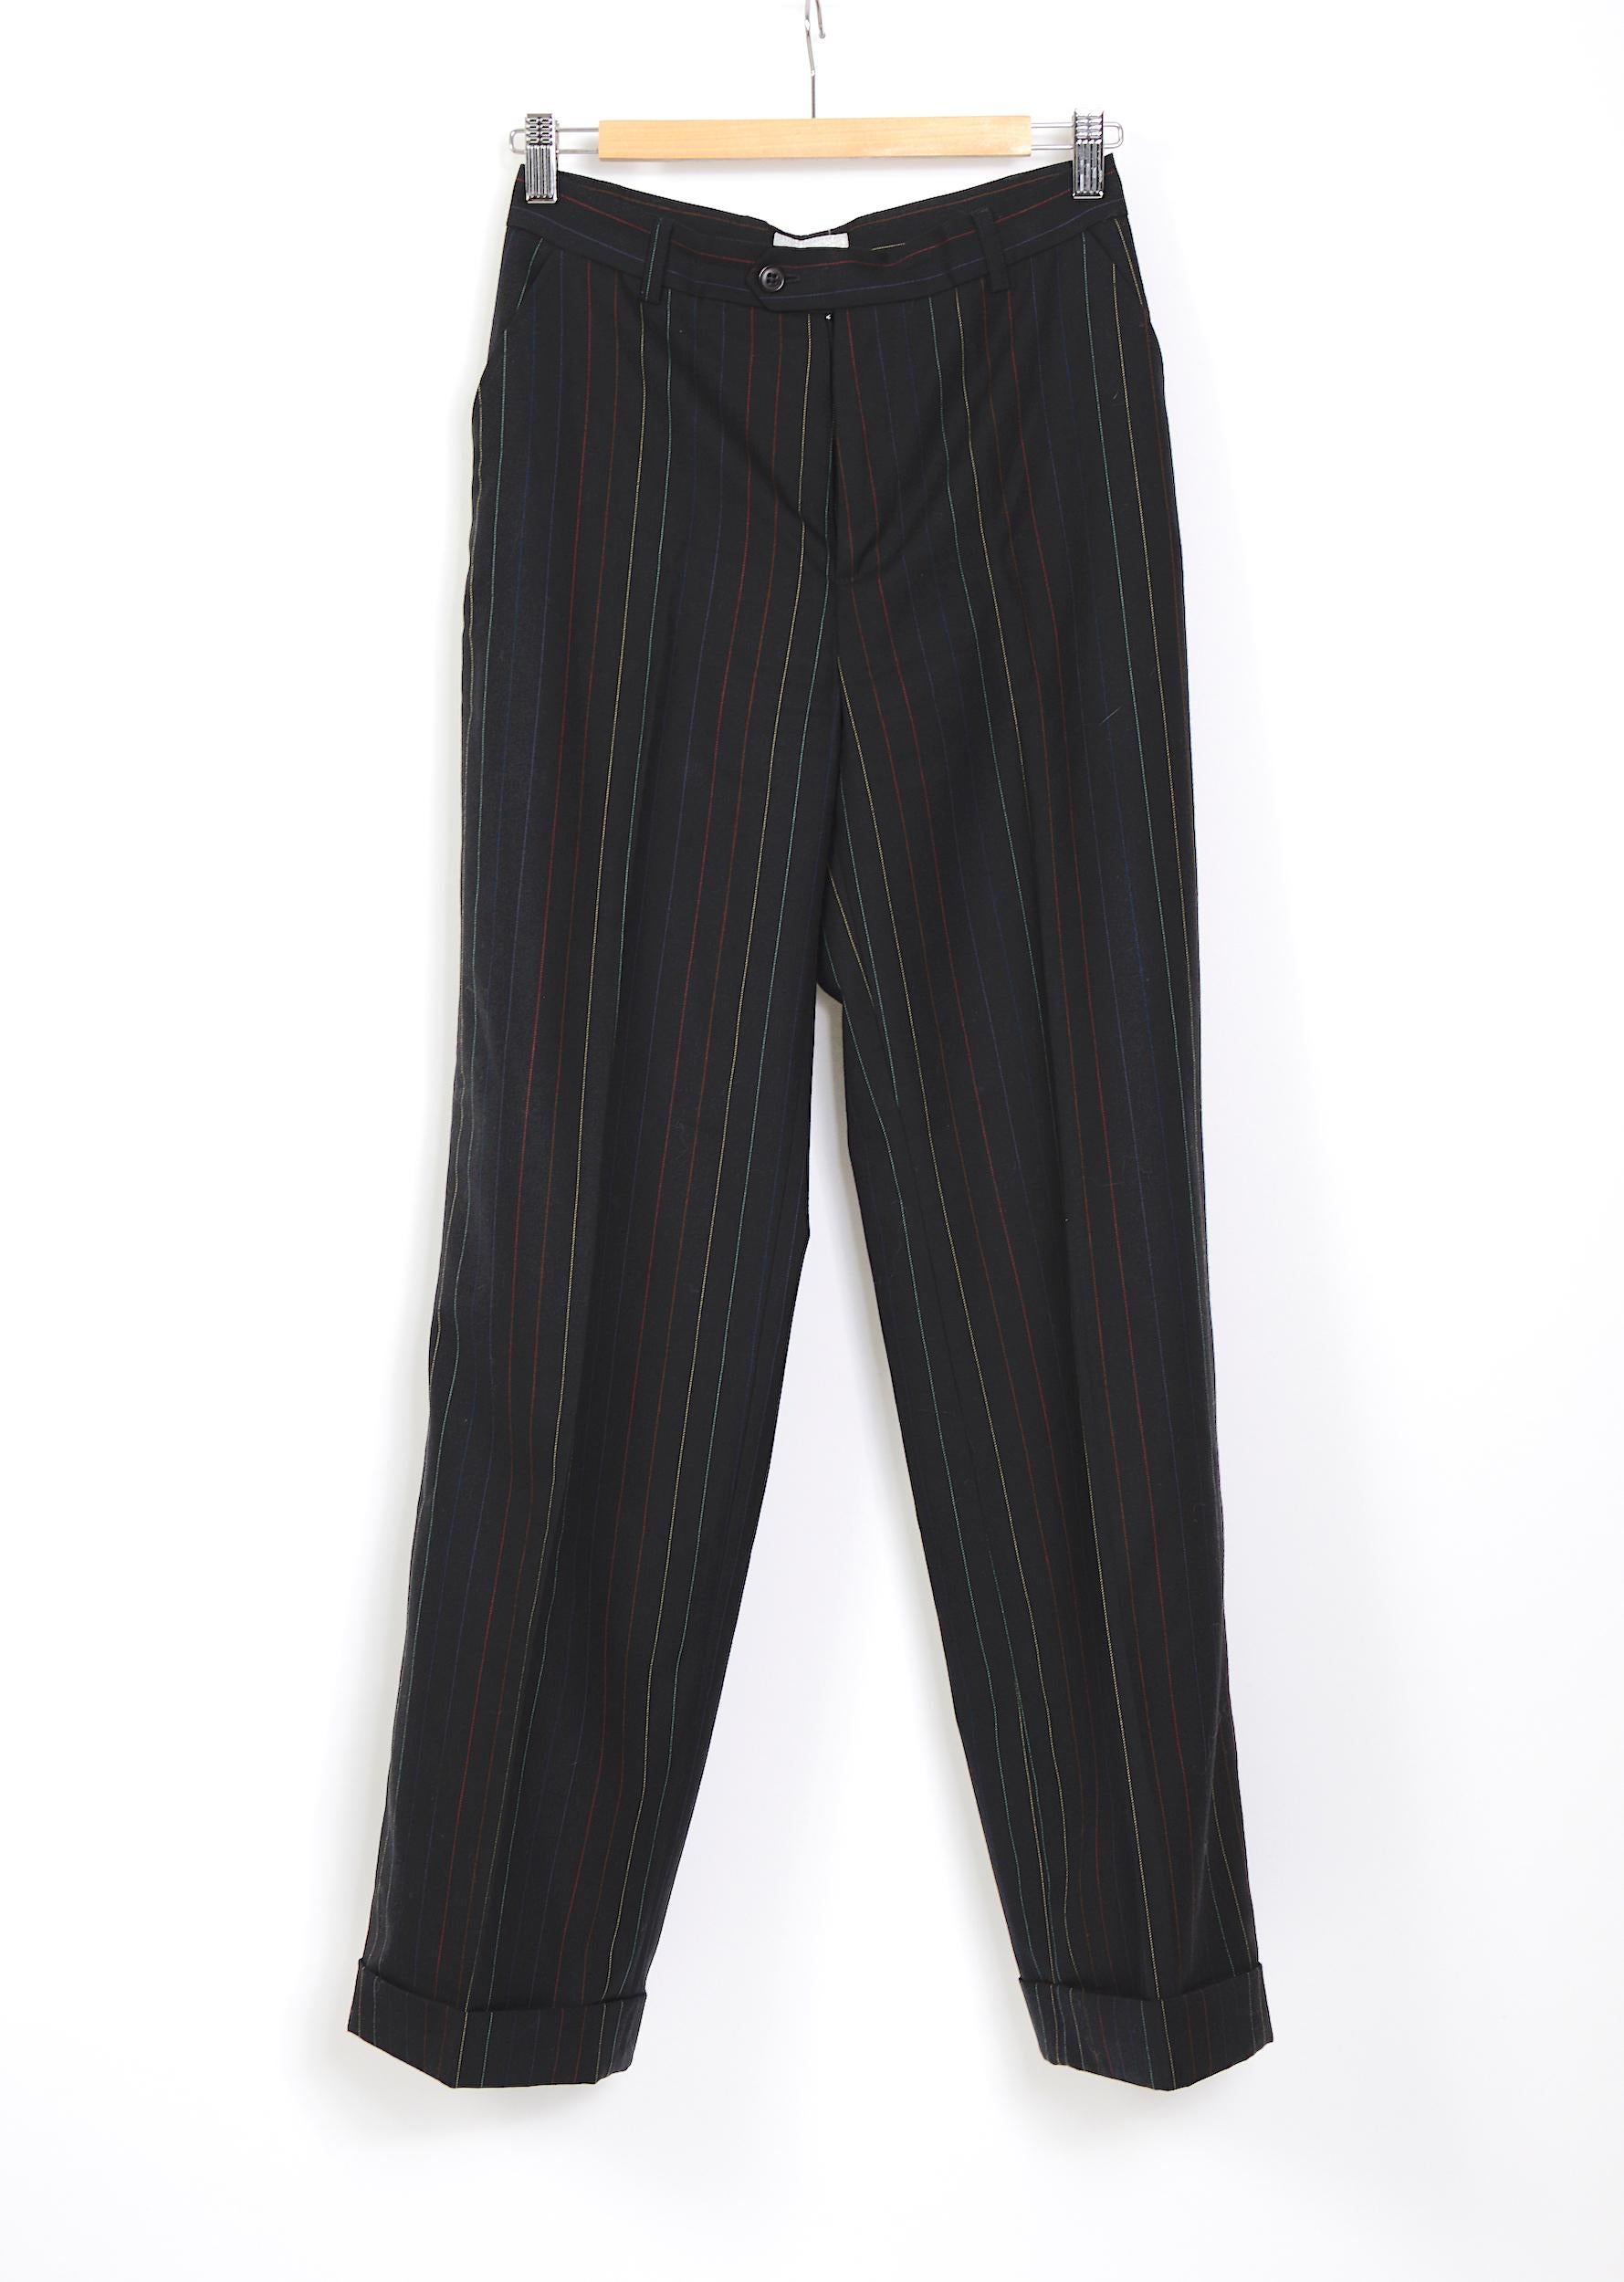 Patrick Cox vintage fall 1996 documented three piece colored pinstripe bleu suit For Sale 4